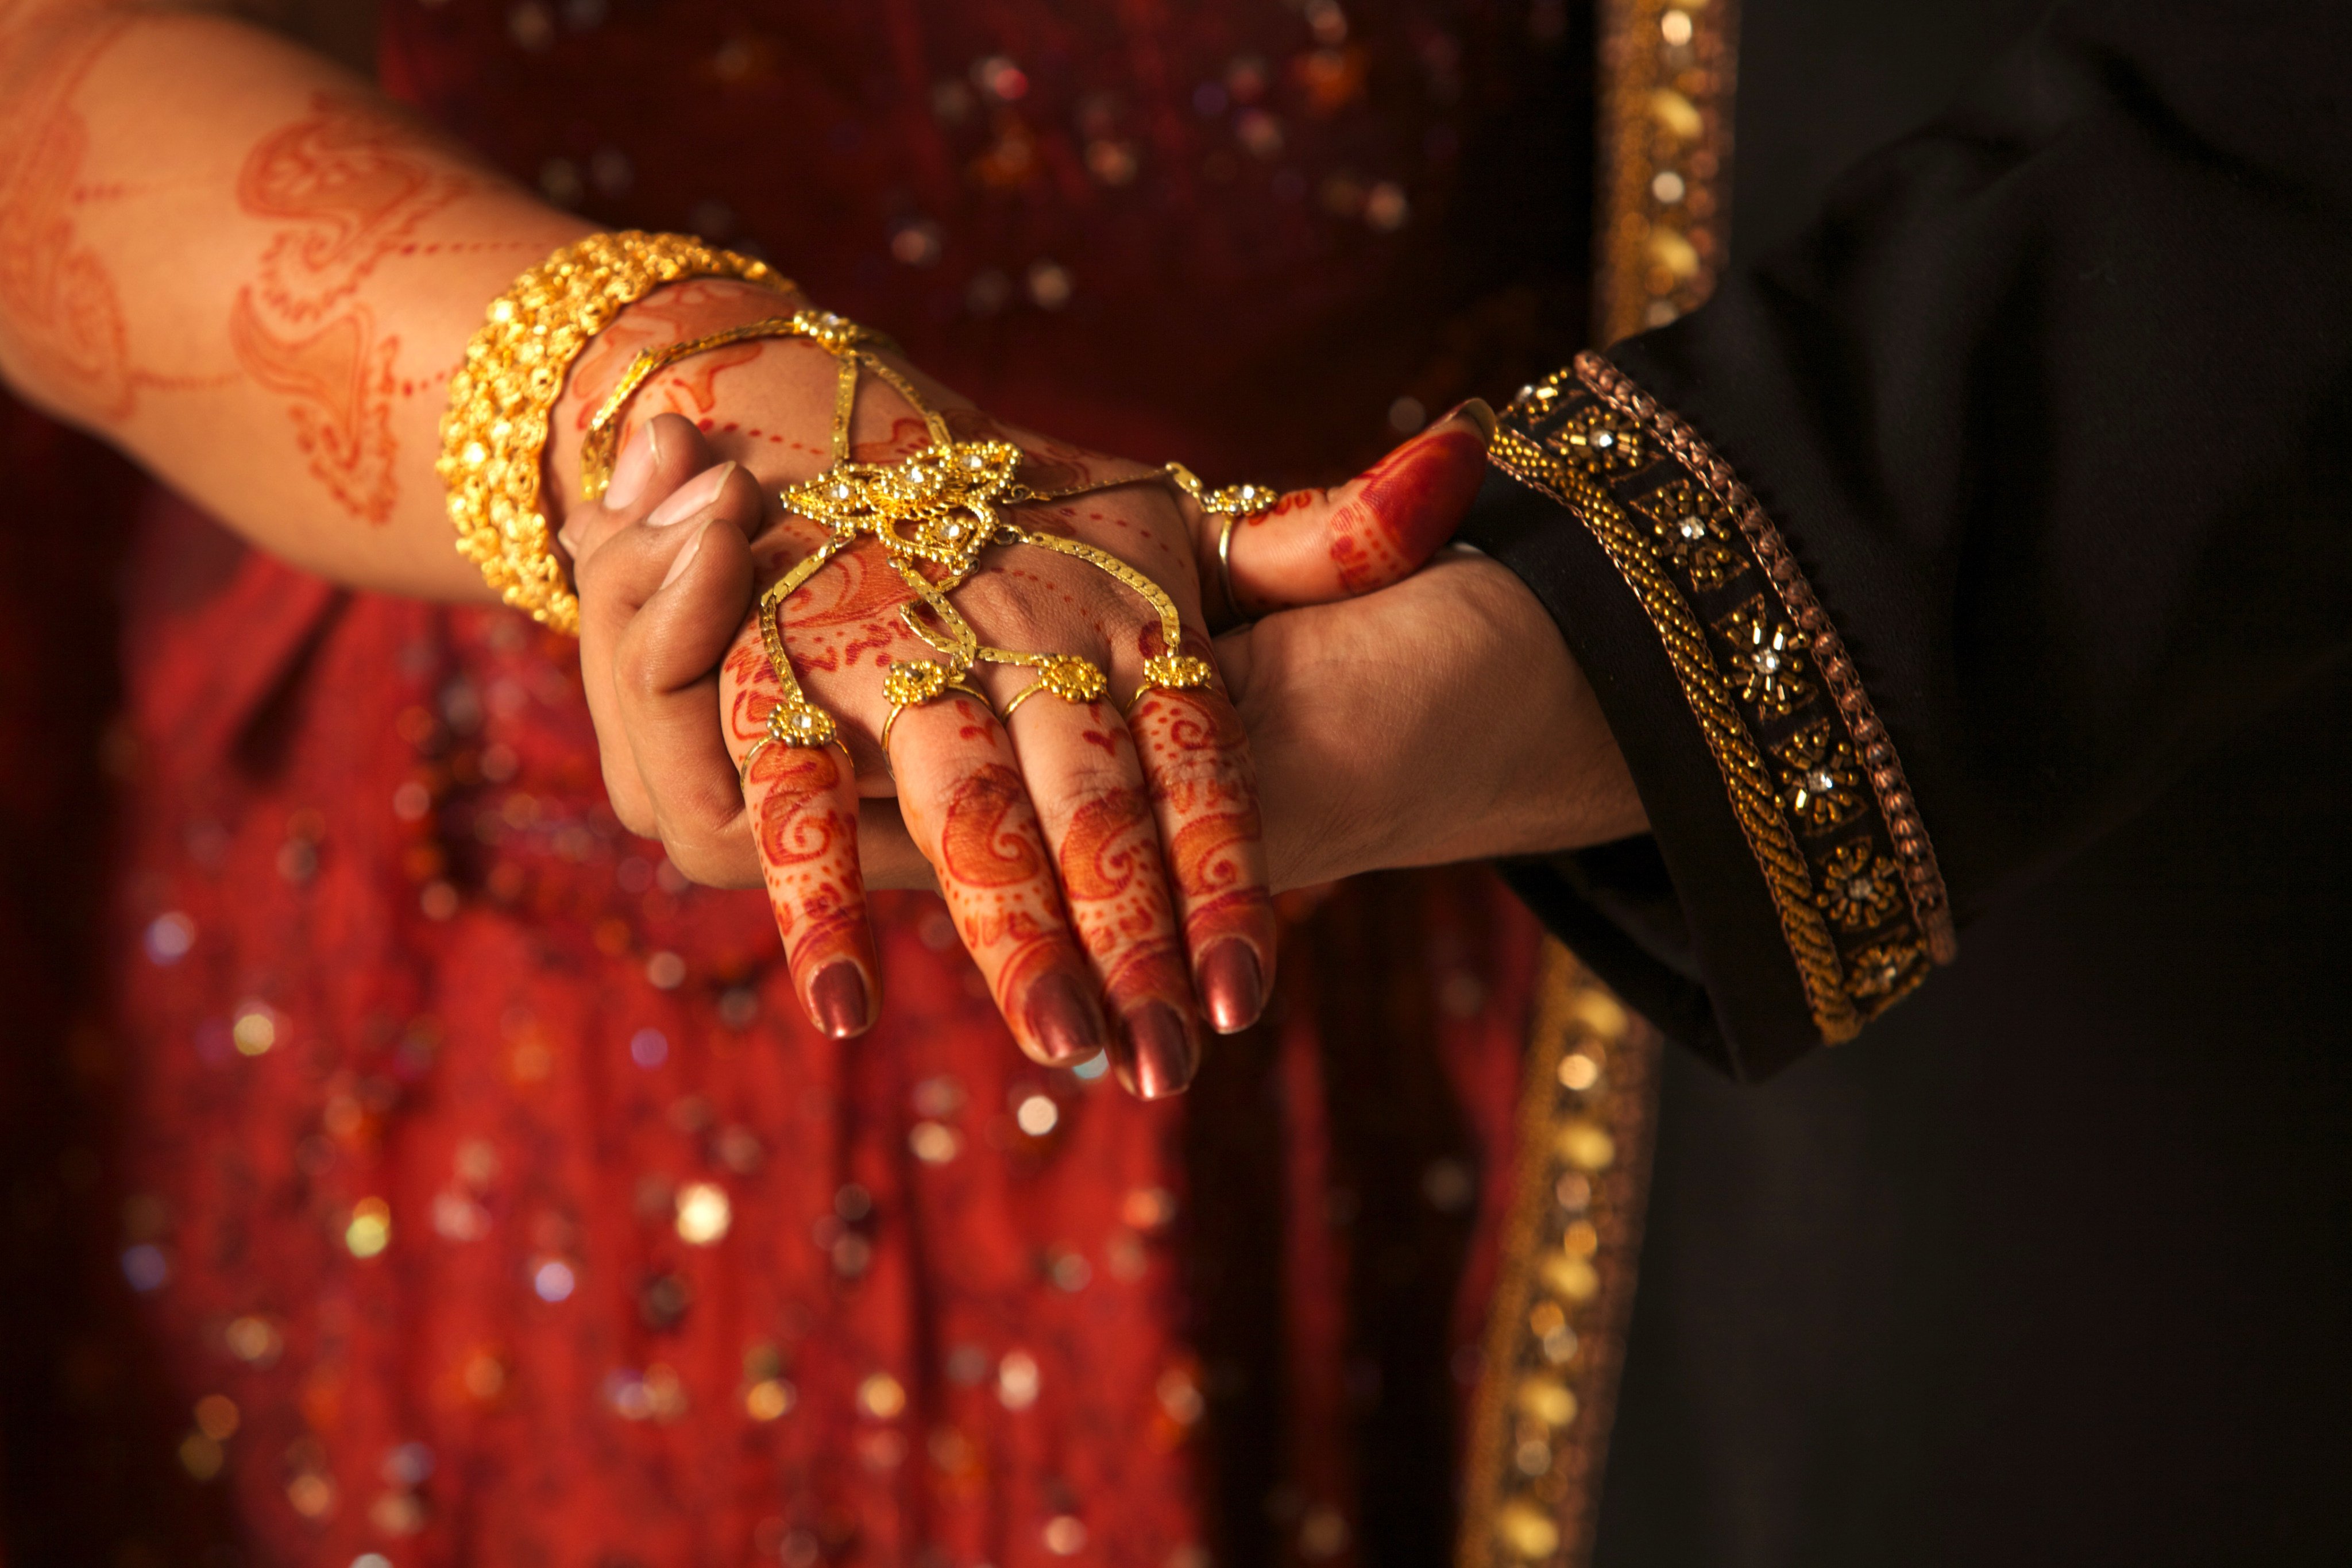 India’s wedding industry has been enjoying a bumper season this winter. But affluent Indians are increasingly choosing to hold their nuptials overseas. Photo: Shutterstock